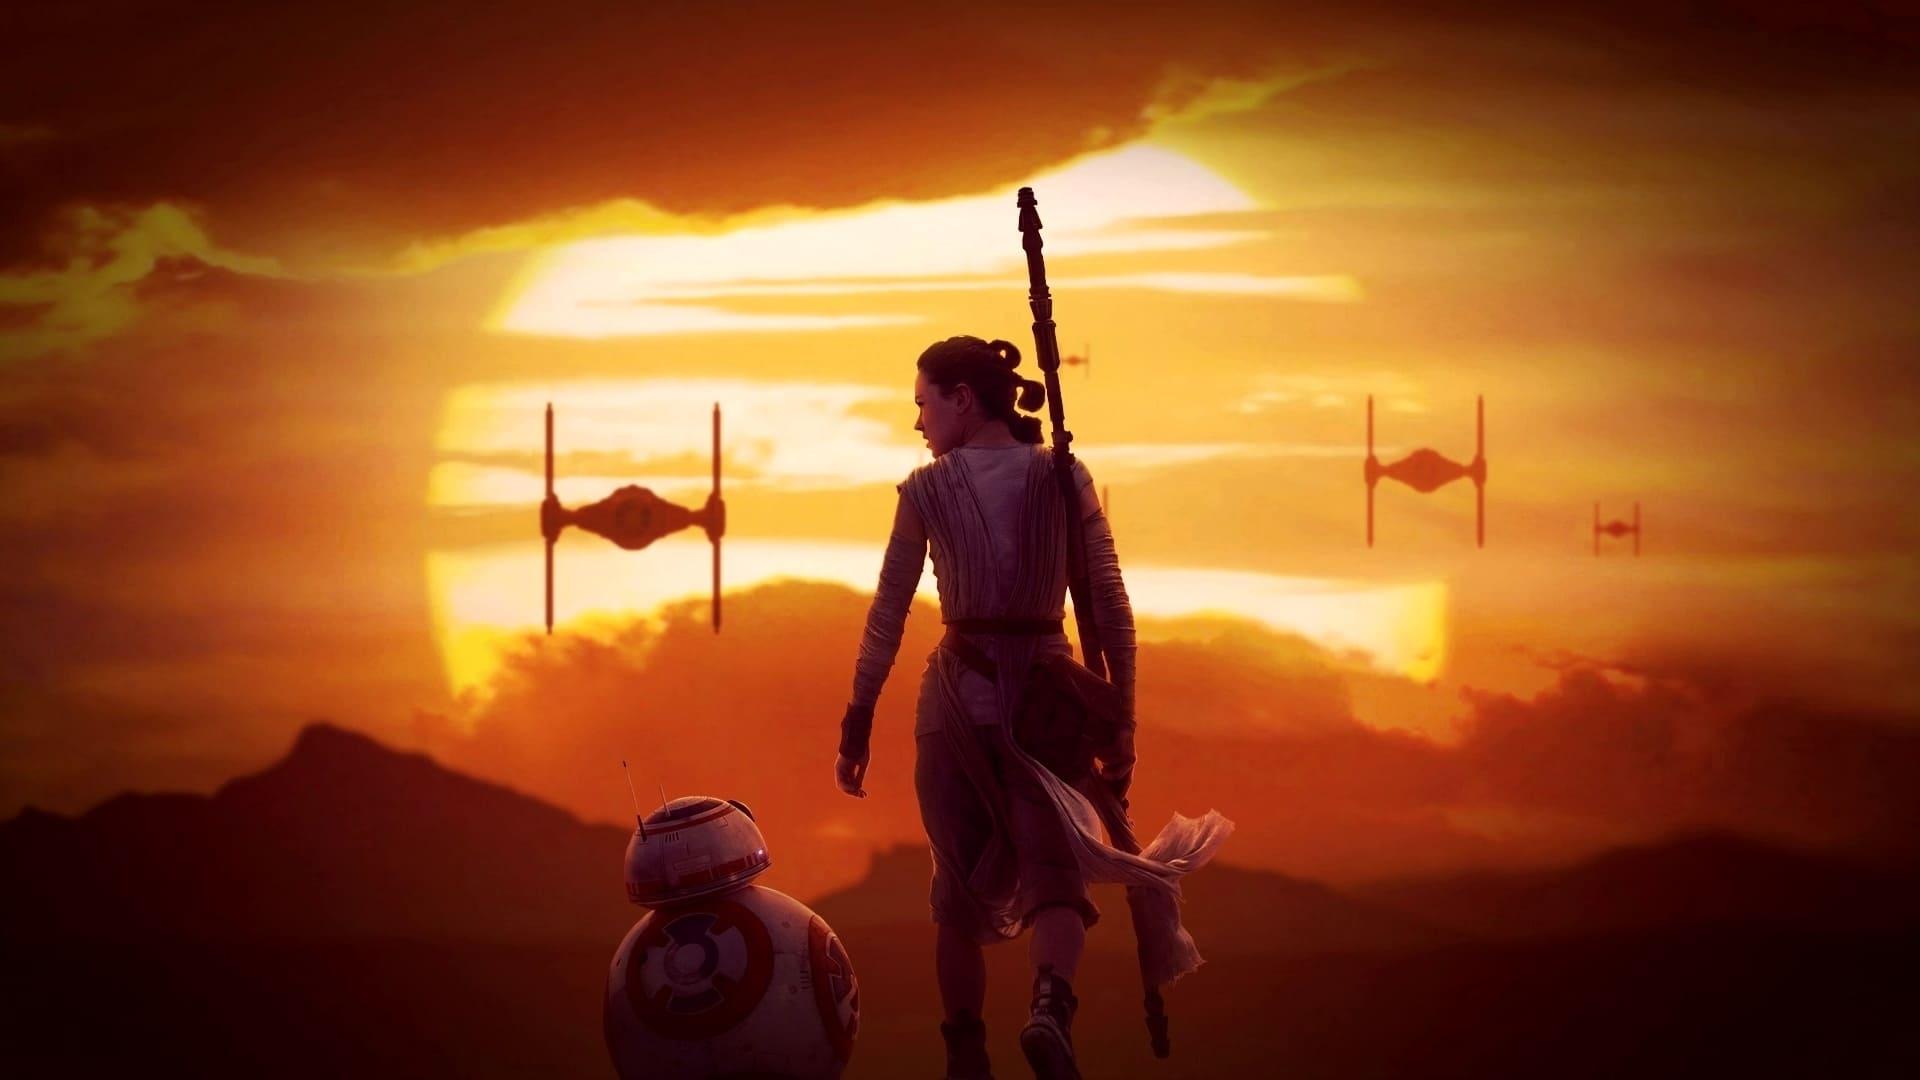 Star Wars: The Force Awakens backdrop